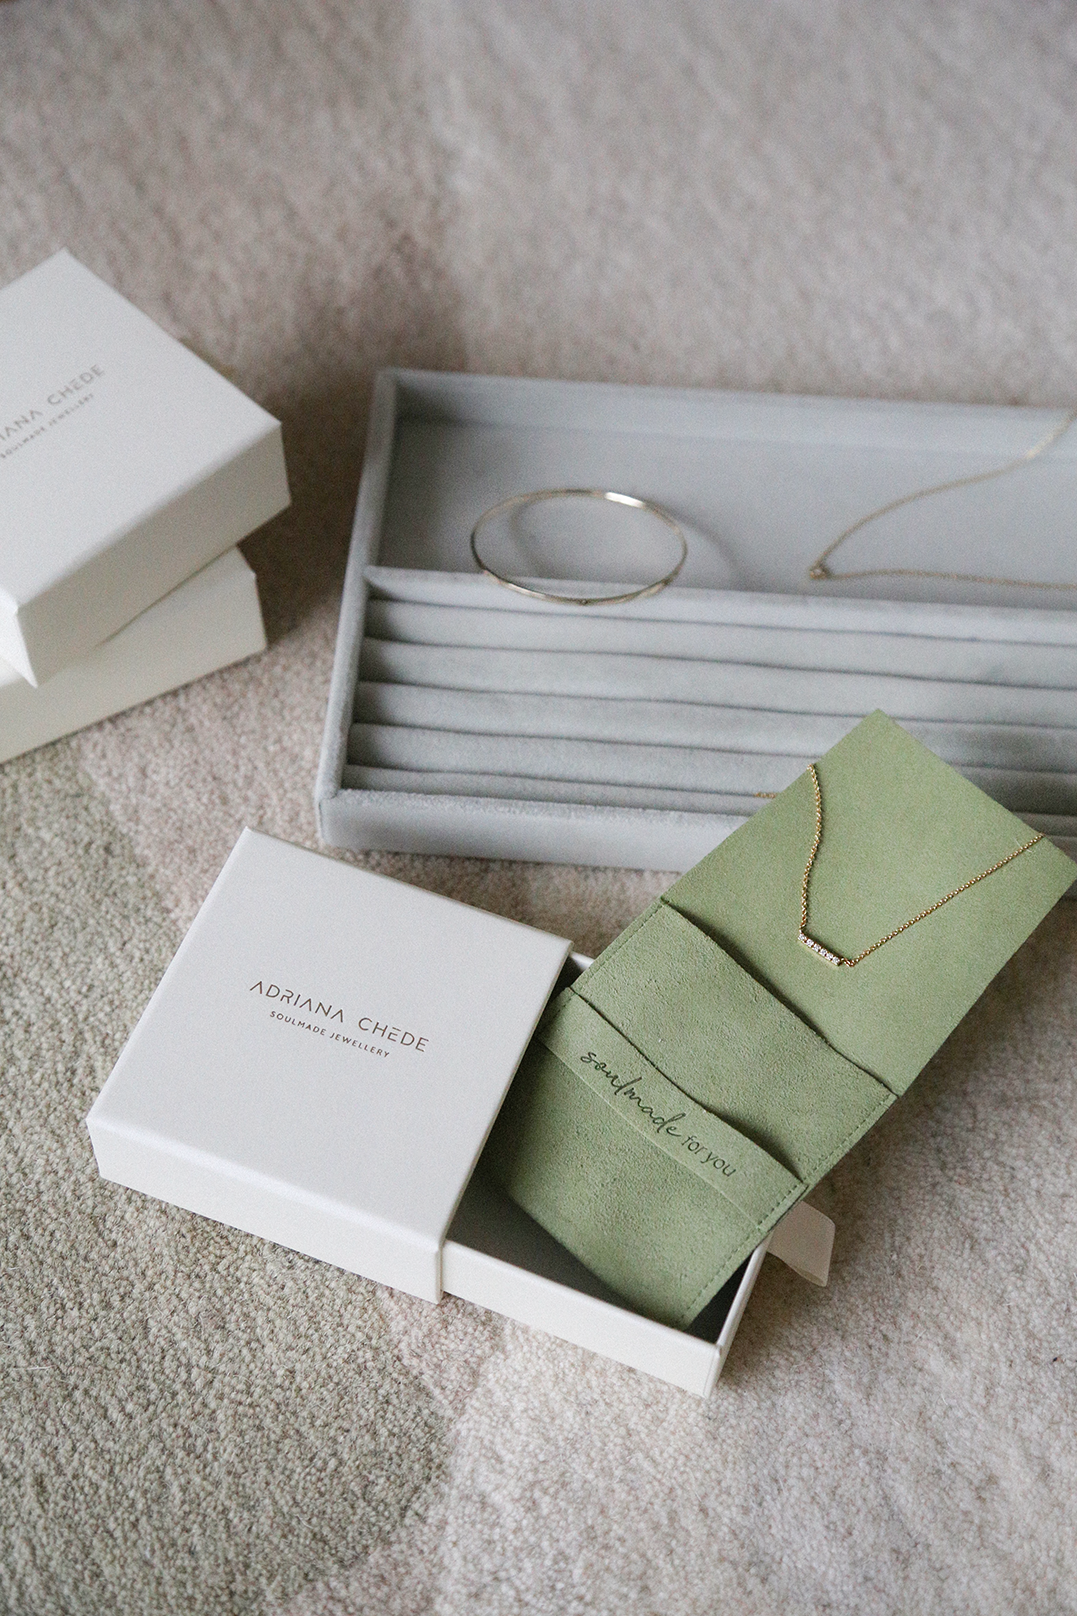 London Gift for her - Adriana Chede Jewellery